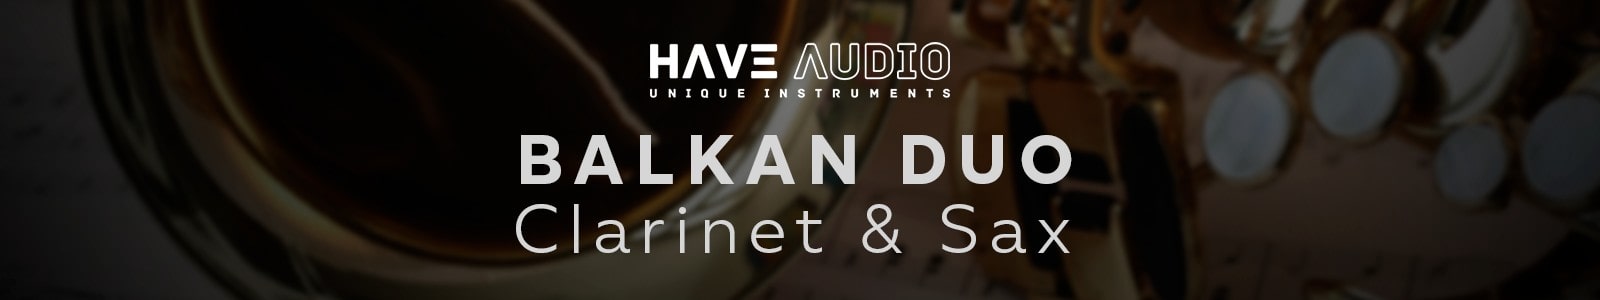 Balkan Duo by Have Audio